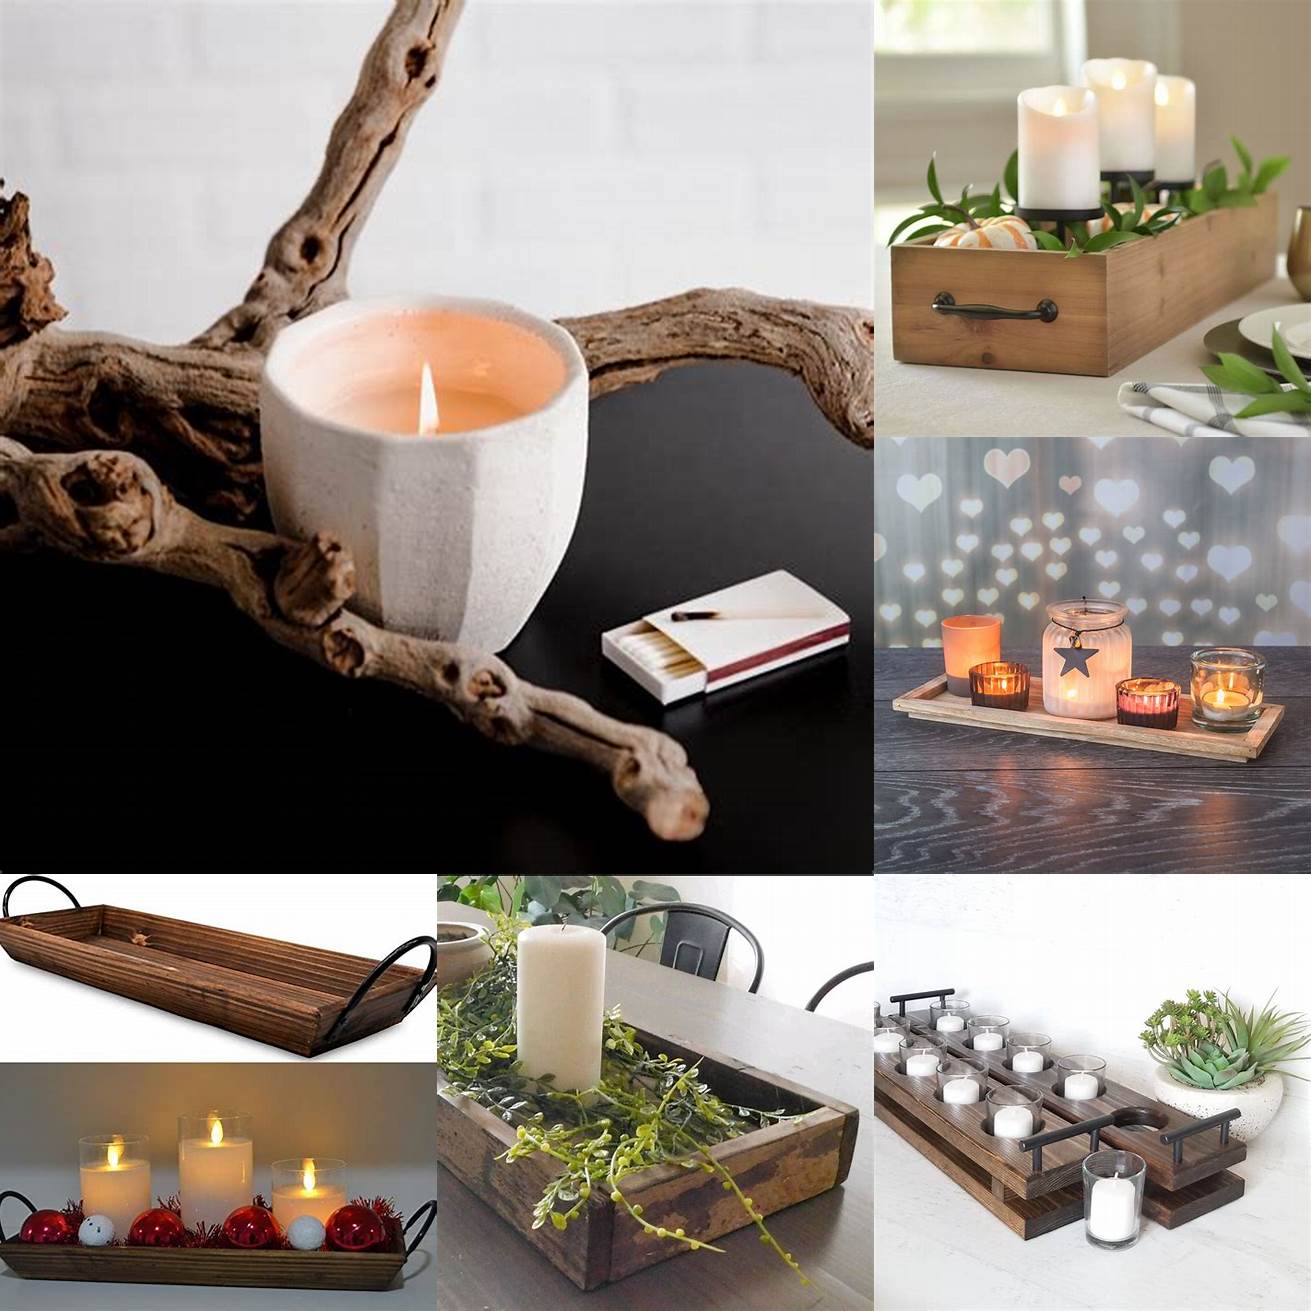 A wooden tray and candles add warmth and coziness to a table